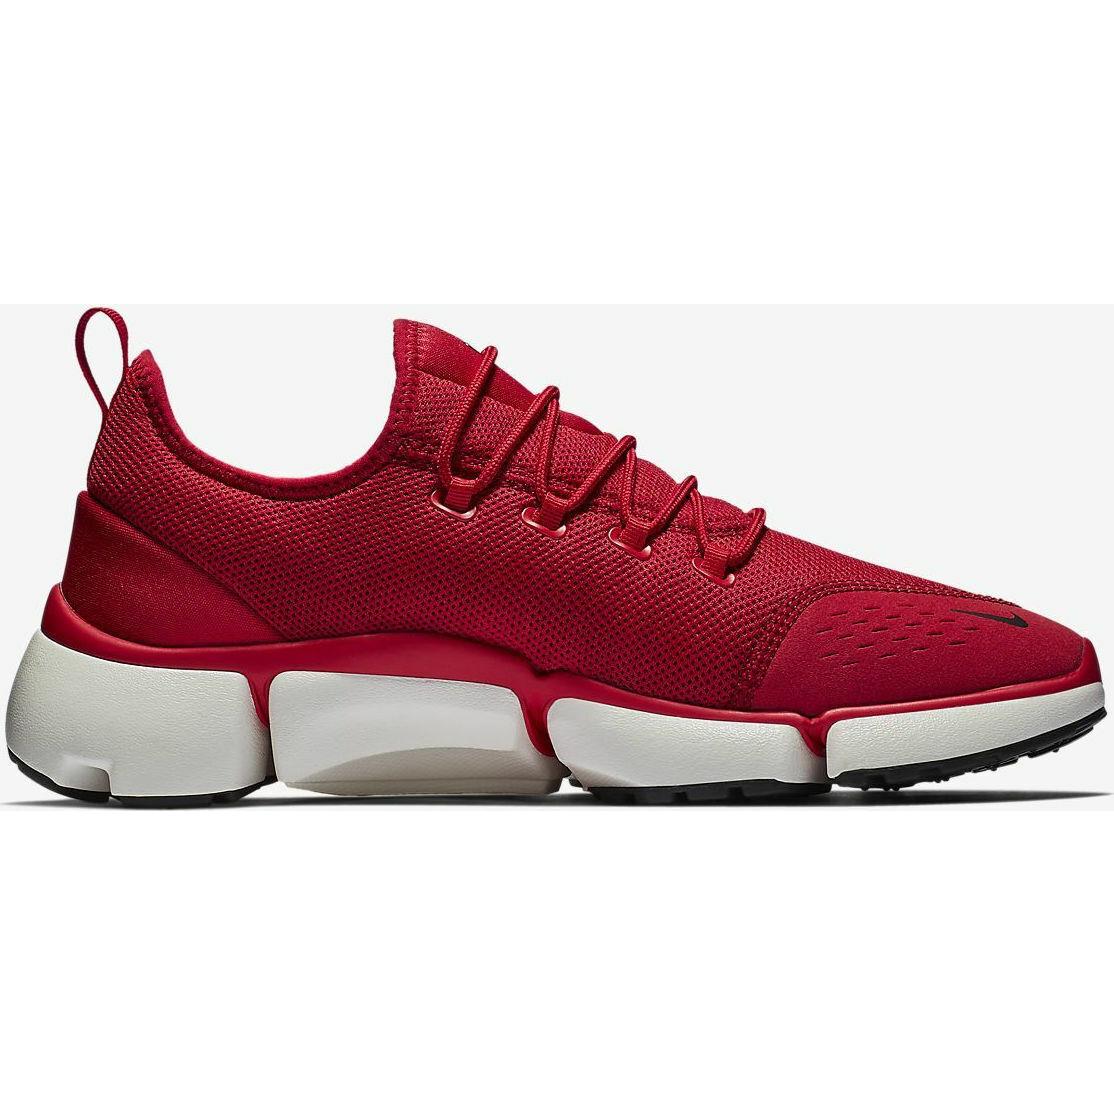 Política No puedo cigarro Nike Pocket Fly DM Size 10.5 TO 12.0 University Red Comfortable |  883212531605 - Nike shoes - University Red, Black, White | SporTipTop